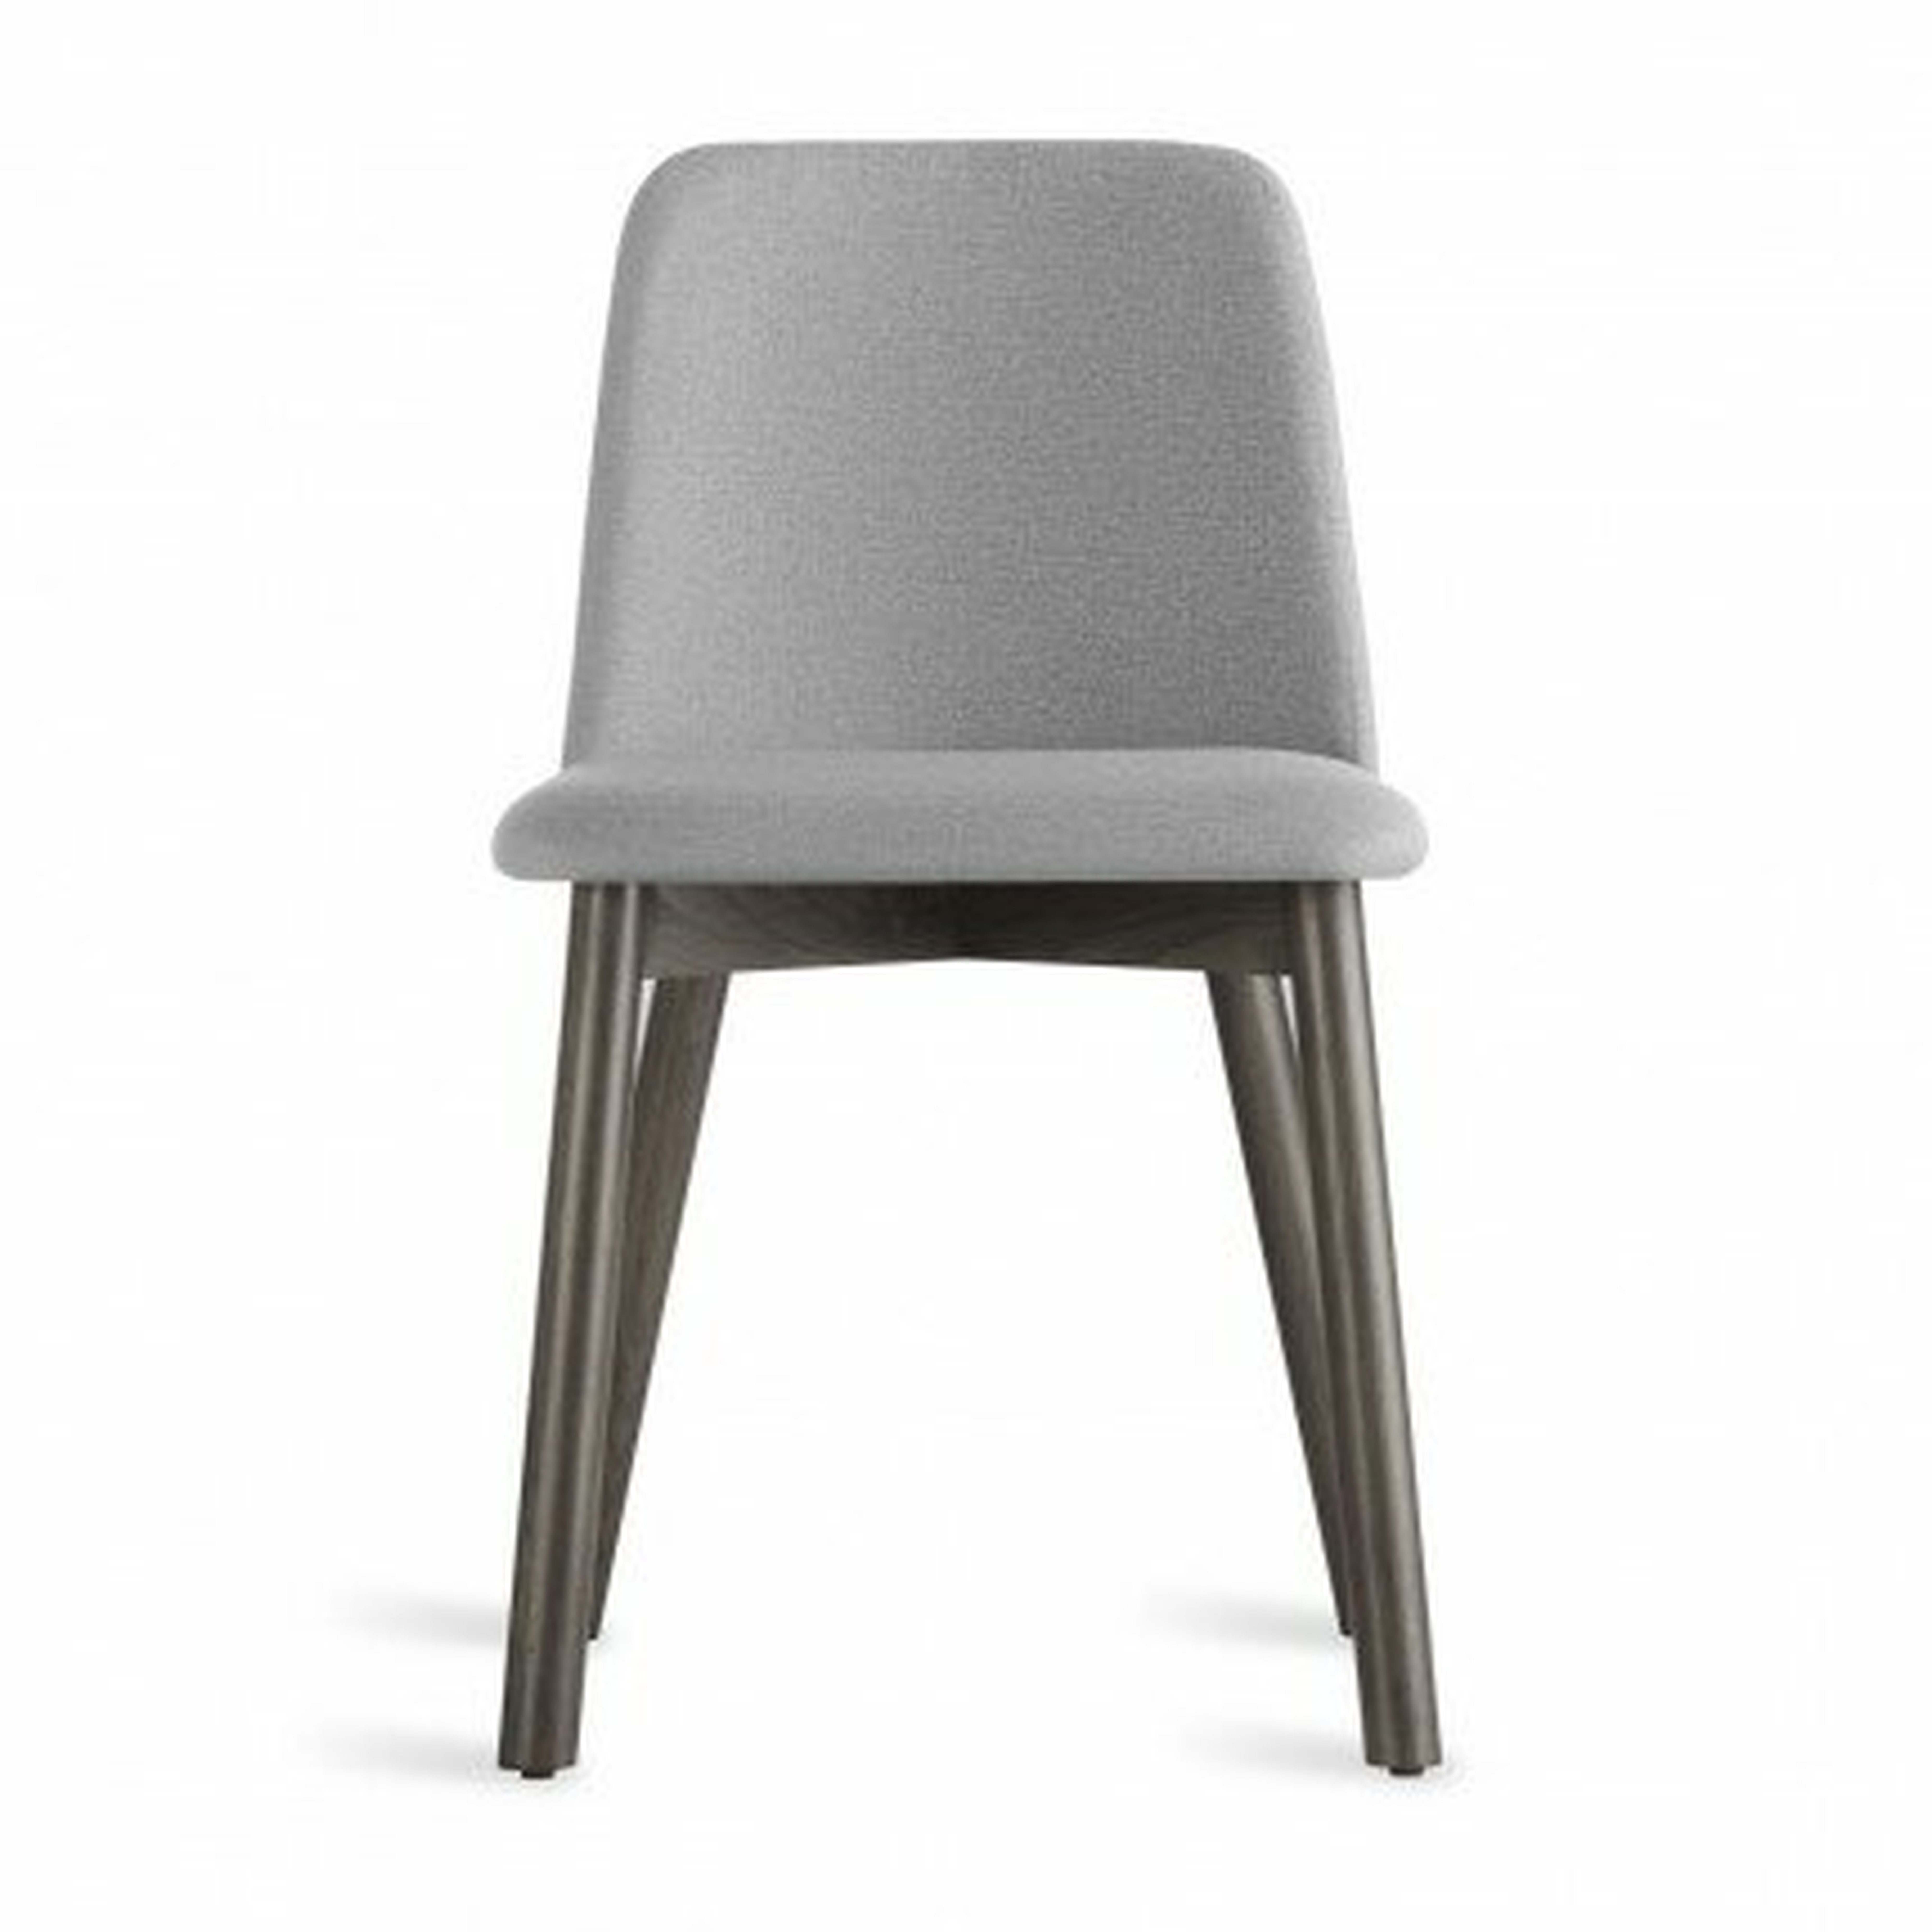 Blu Dot Chip Side Chair in Pewter Color: Smoke - Perigold